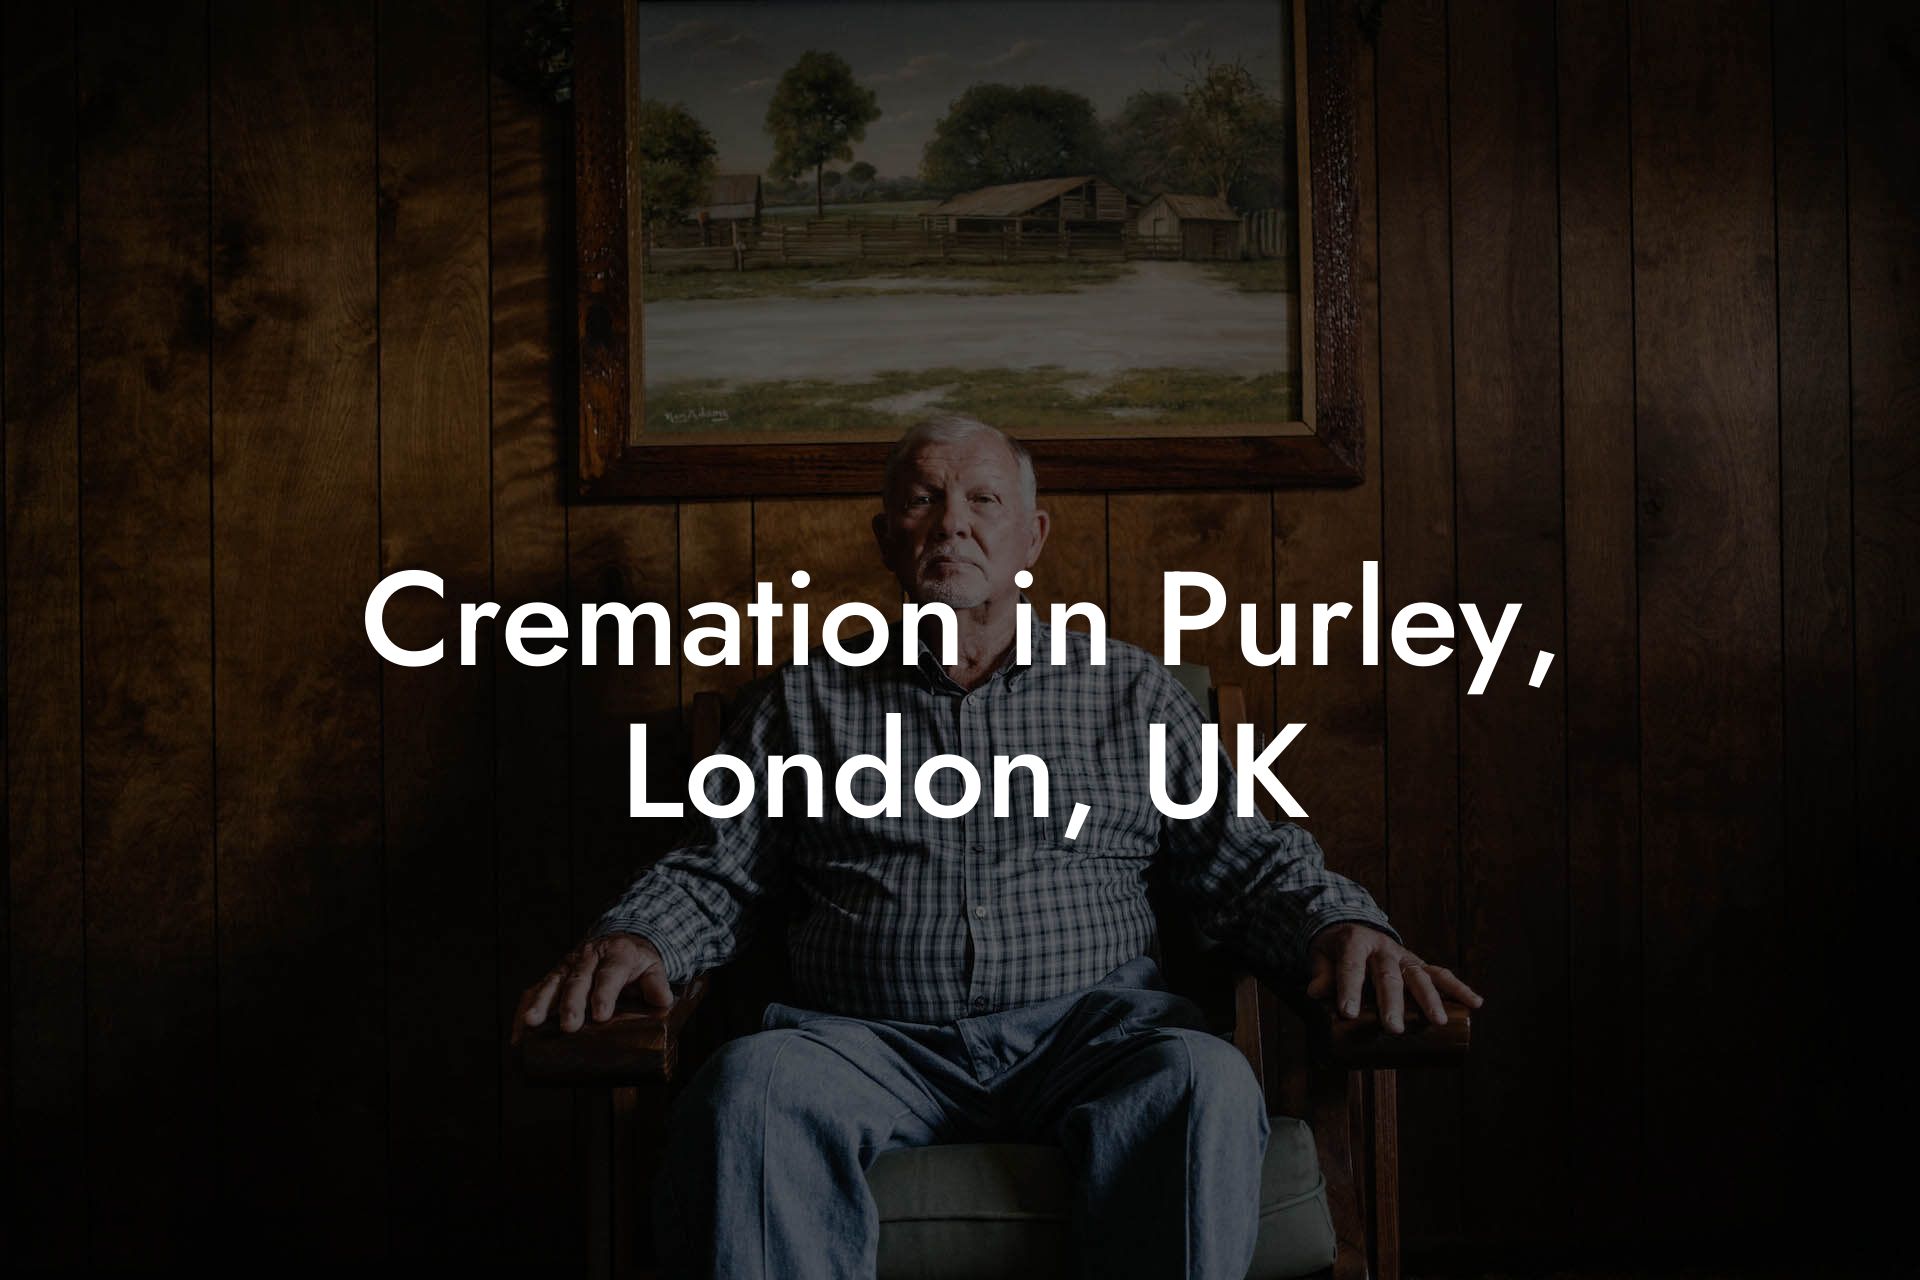 Cremation in Purley, London, UK